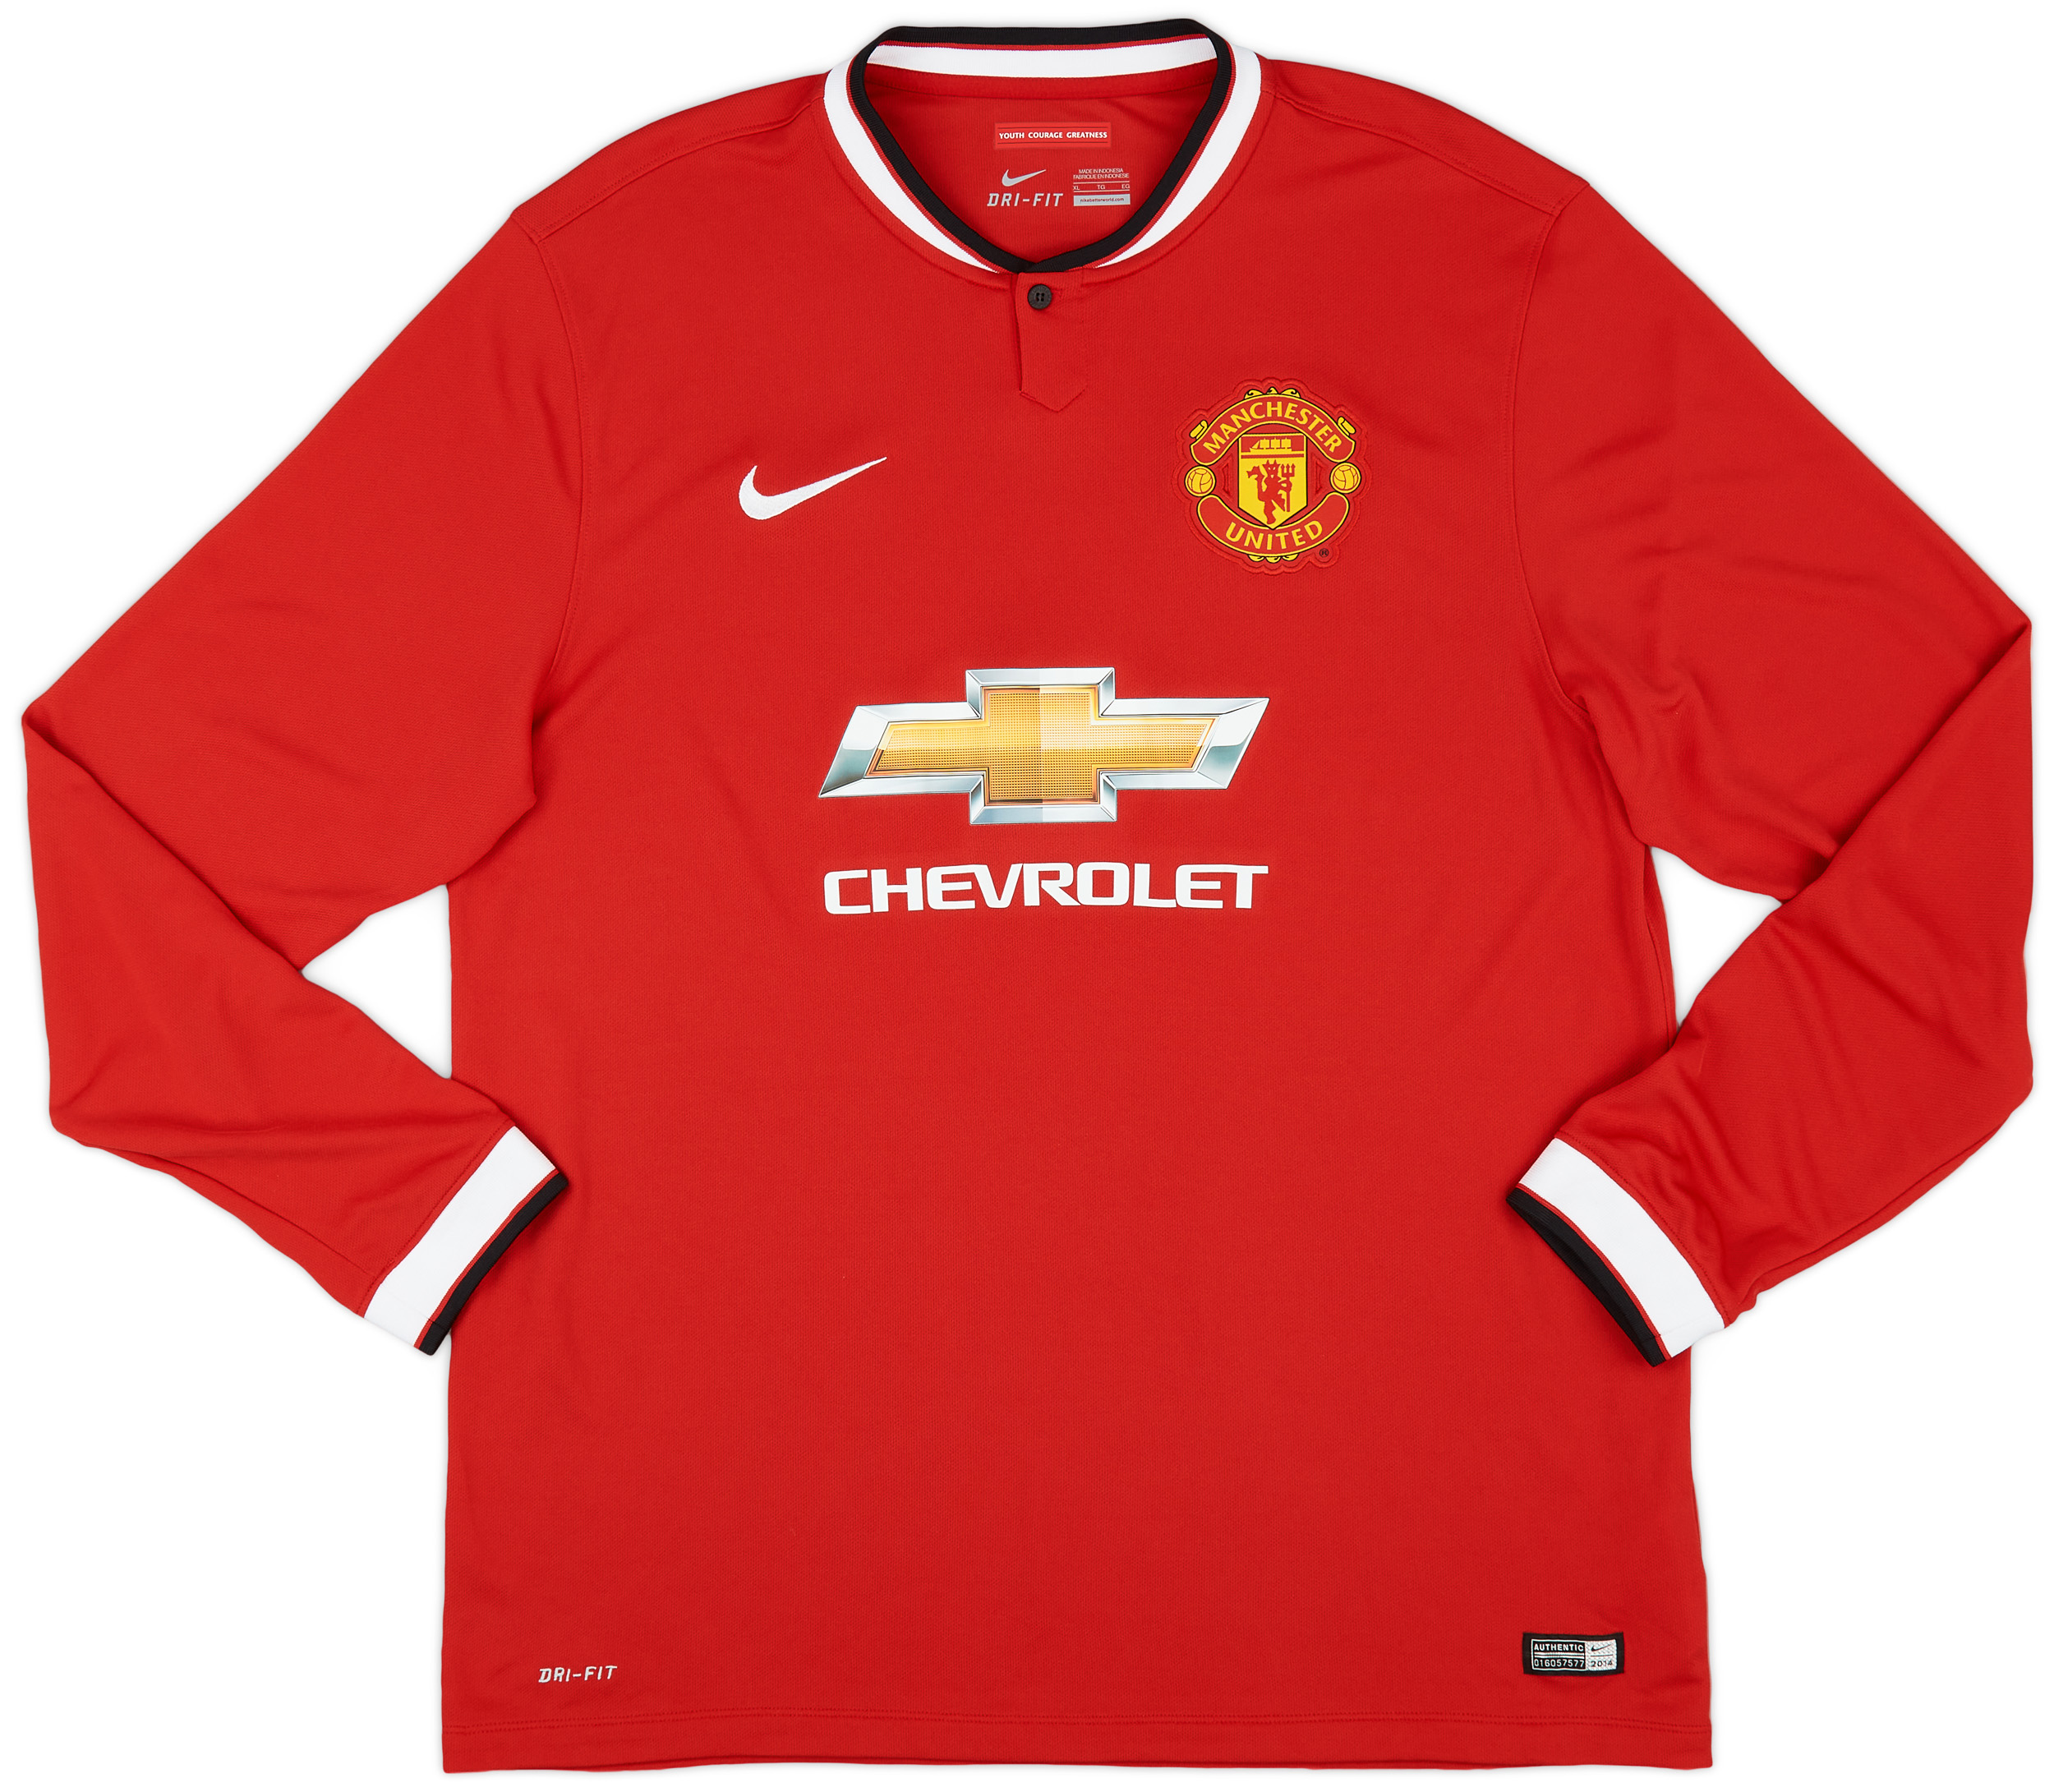 2014-15 Manchester United Home Shirt - 10/10 - ()